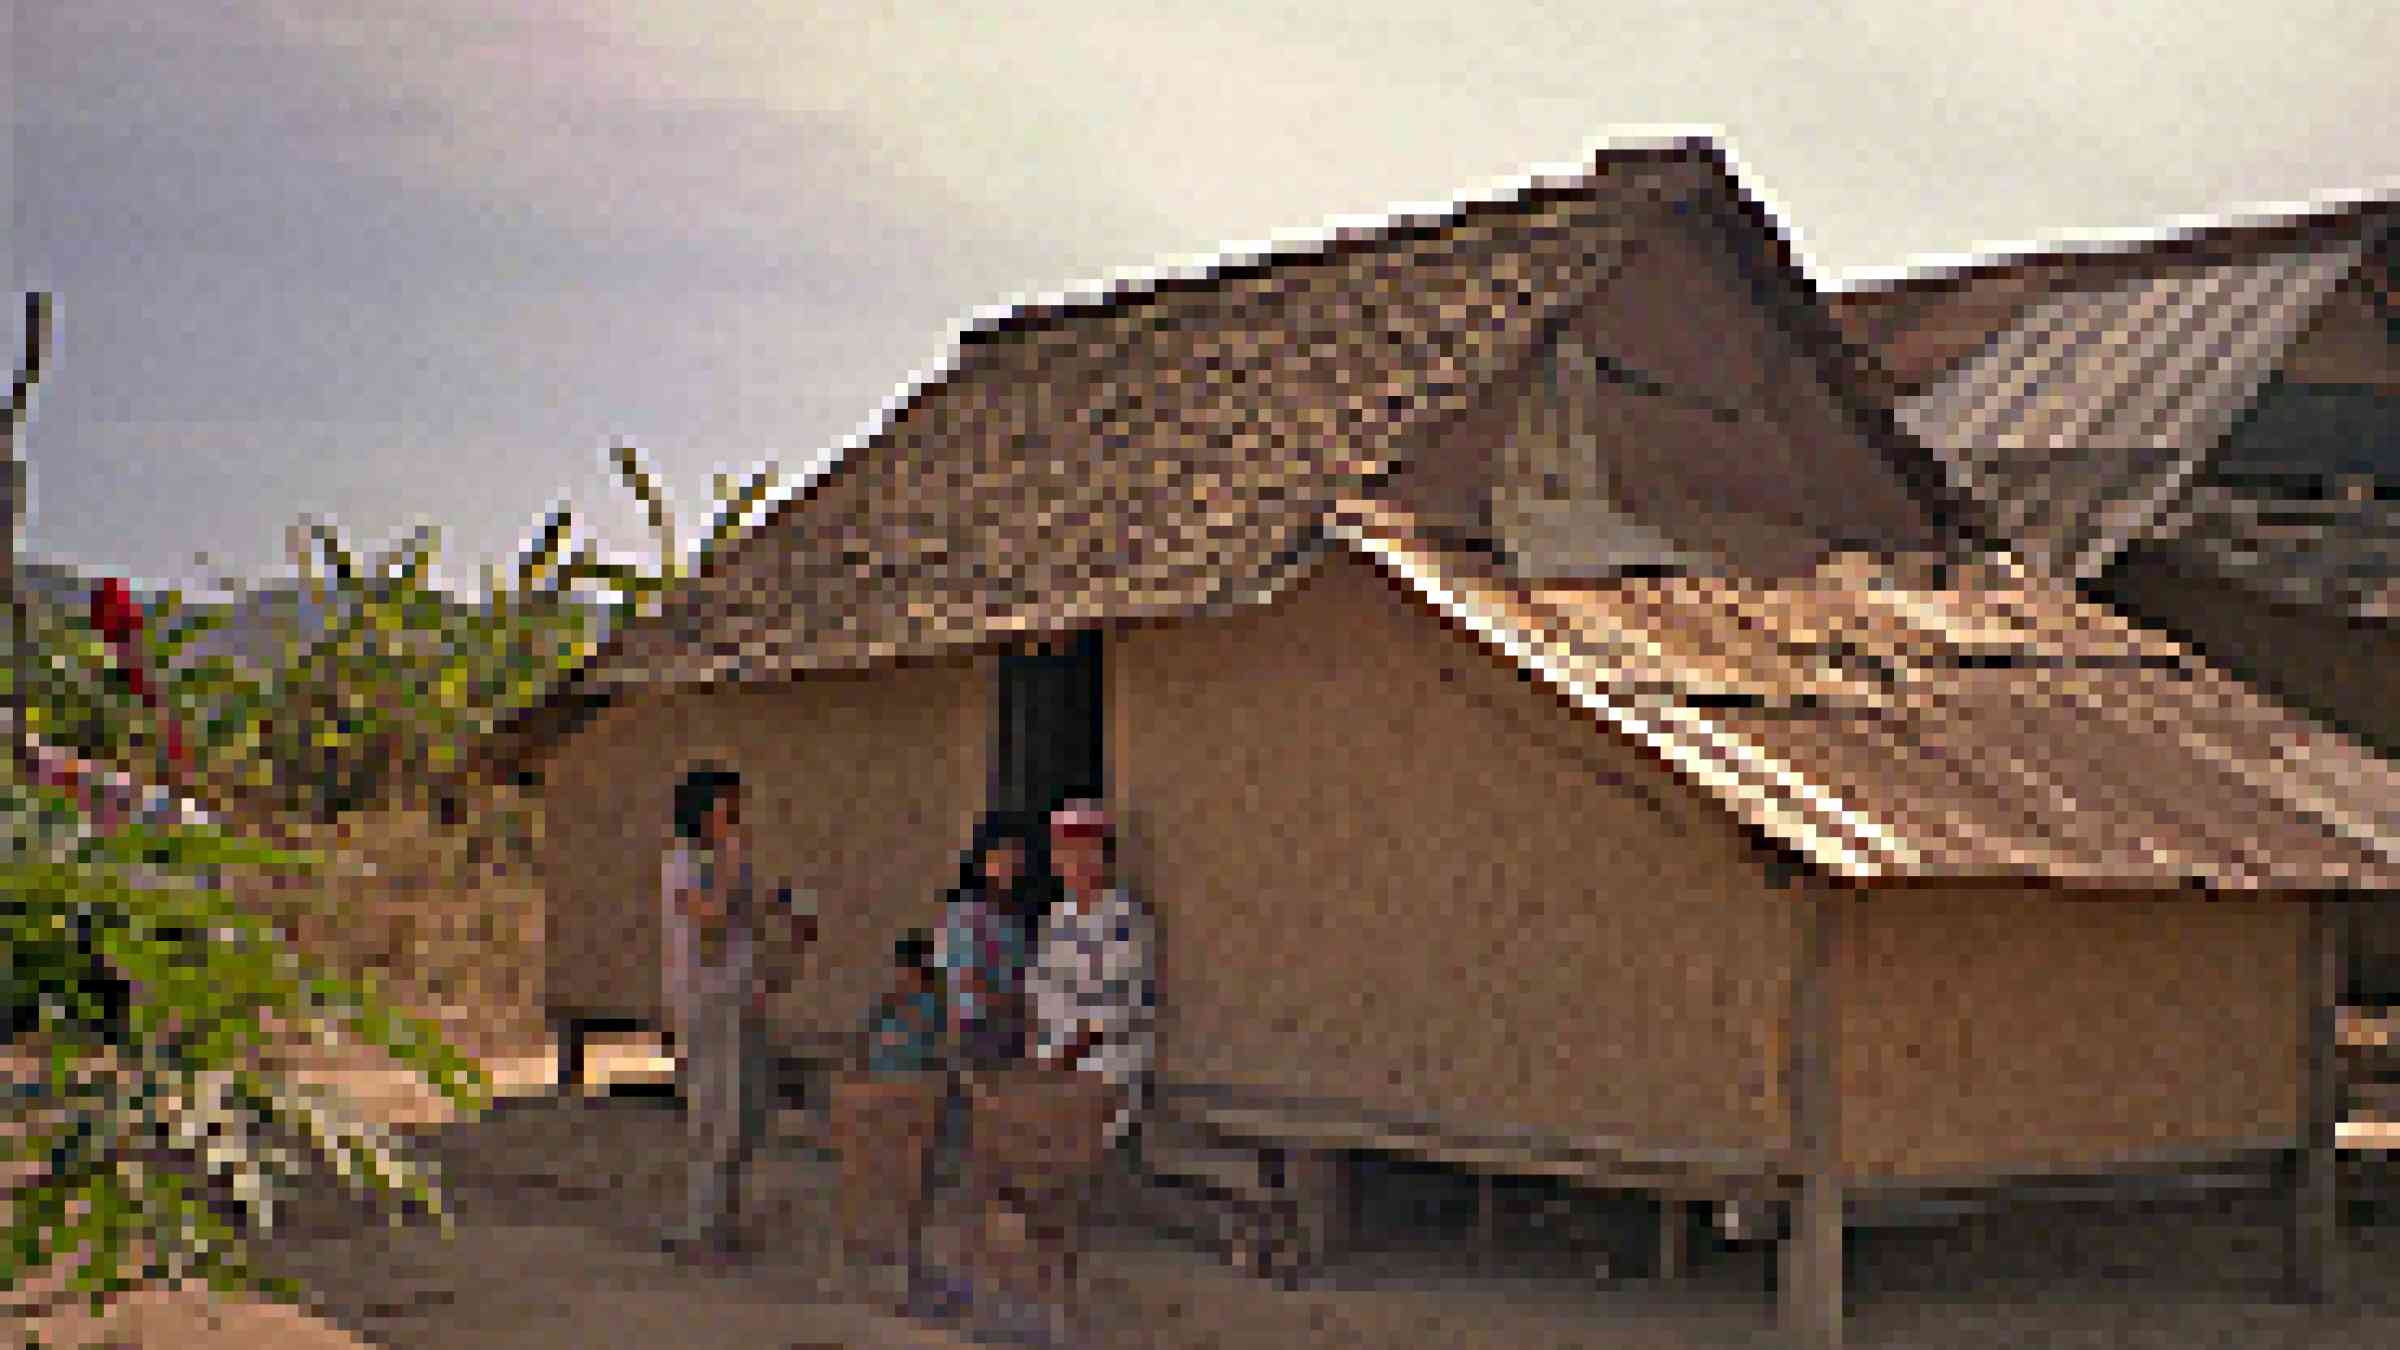 Photo of a bamboo house in Viet Nam by Flickr user, Lon&Queta, Creative Commons Attribution-NonCommercial-ShareAlike 2.0 Generic, http://www.flickr.com/photos/lonqueta/3966369803/